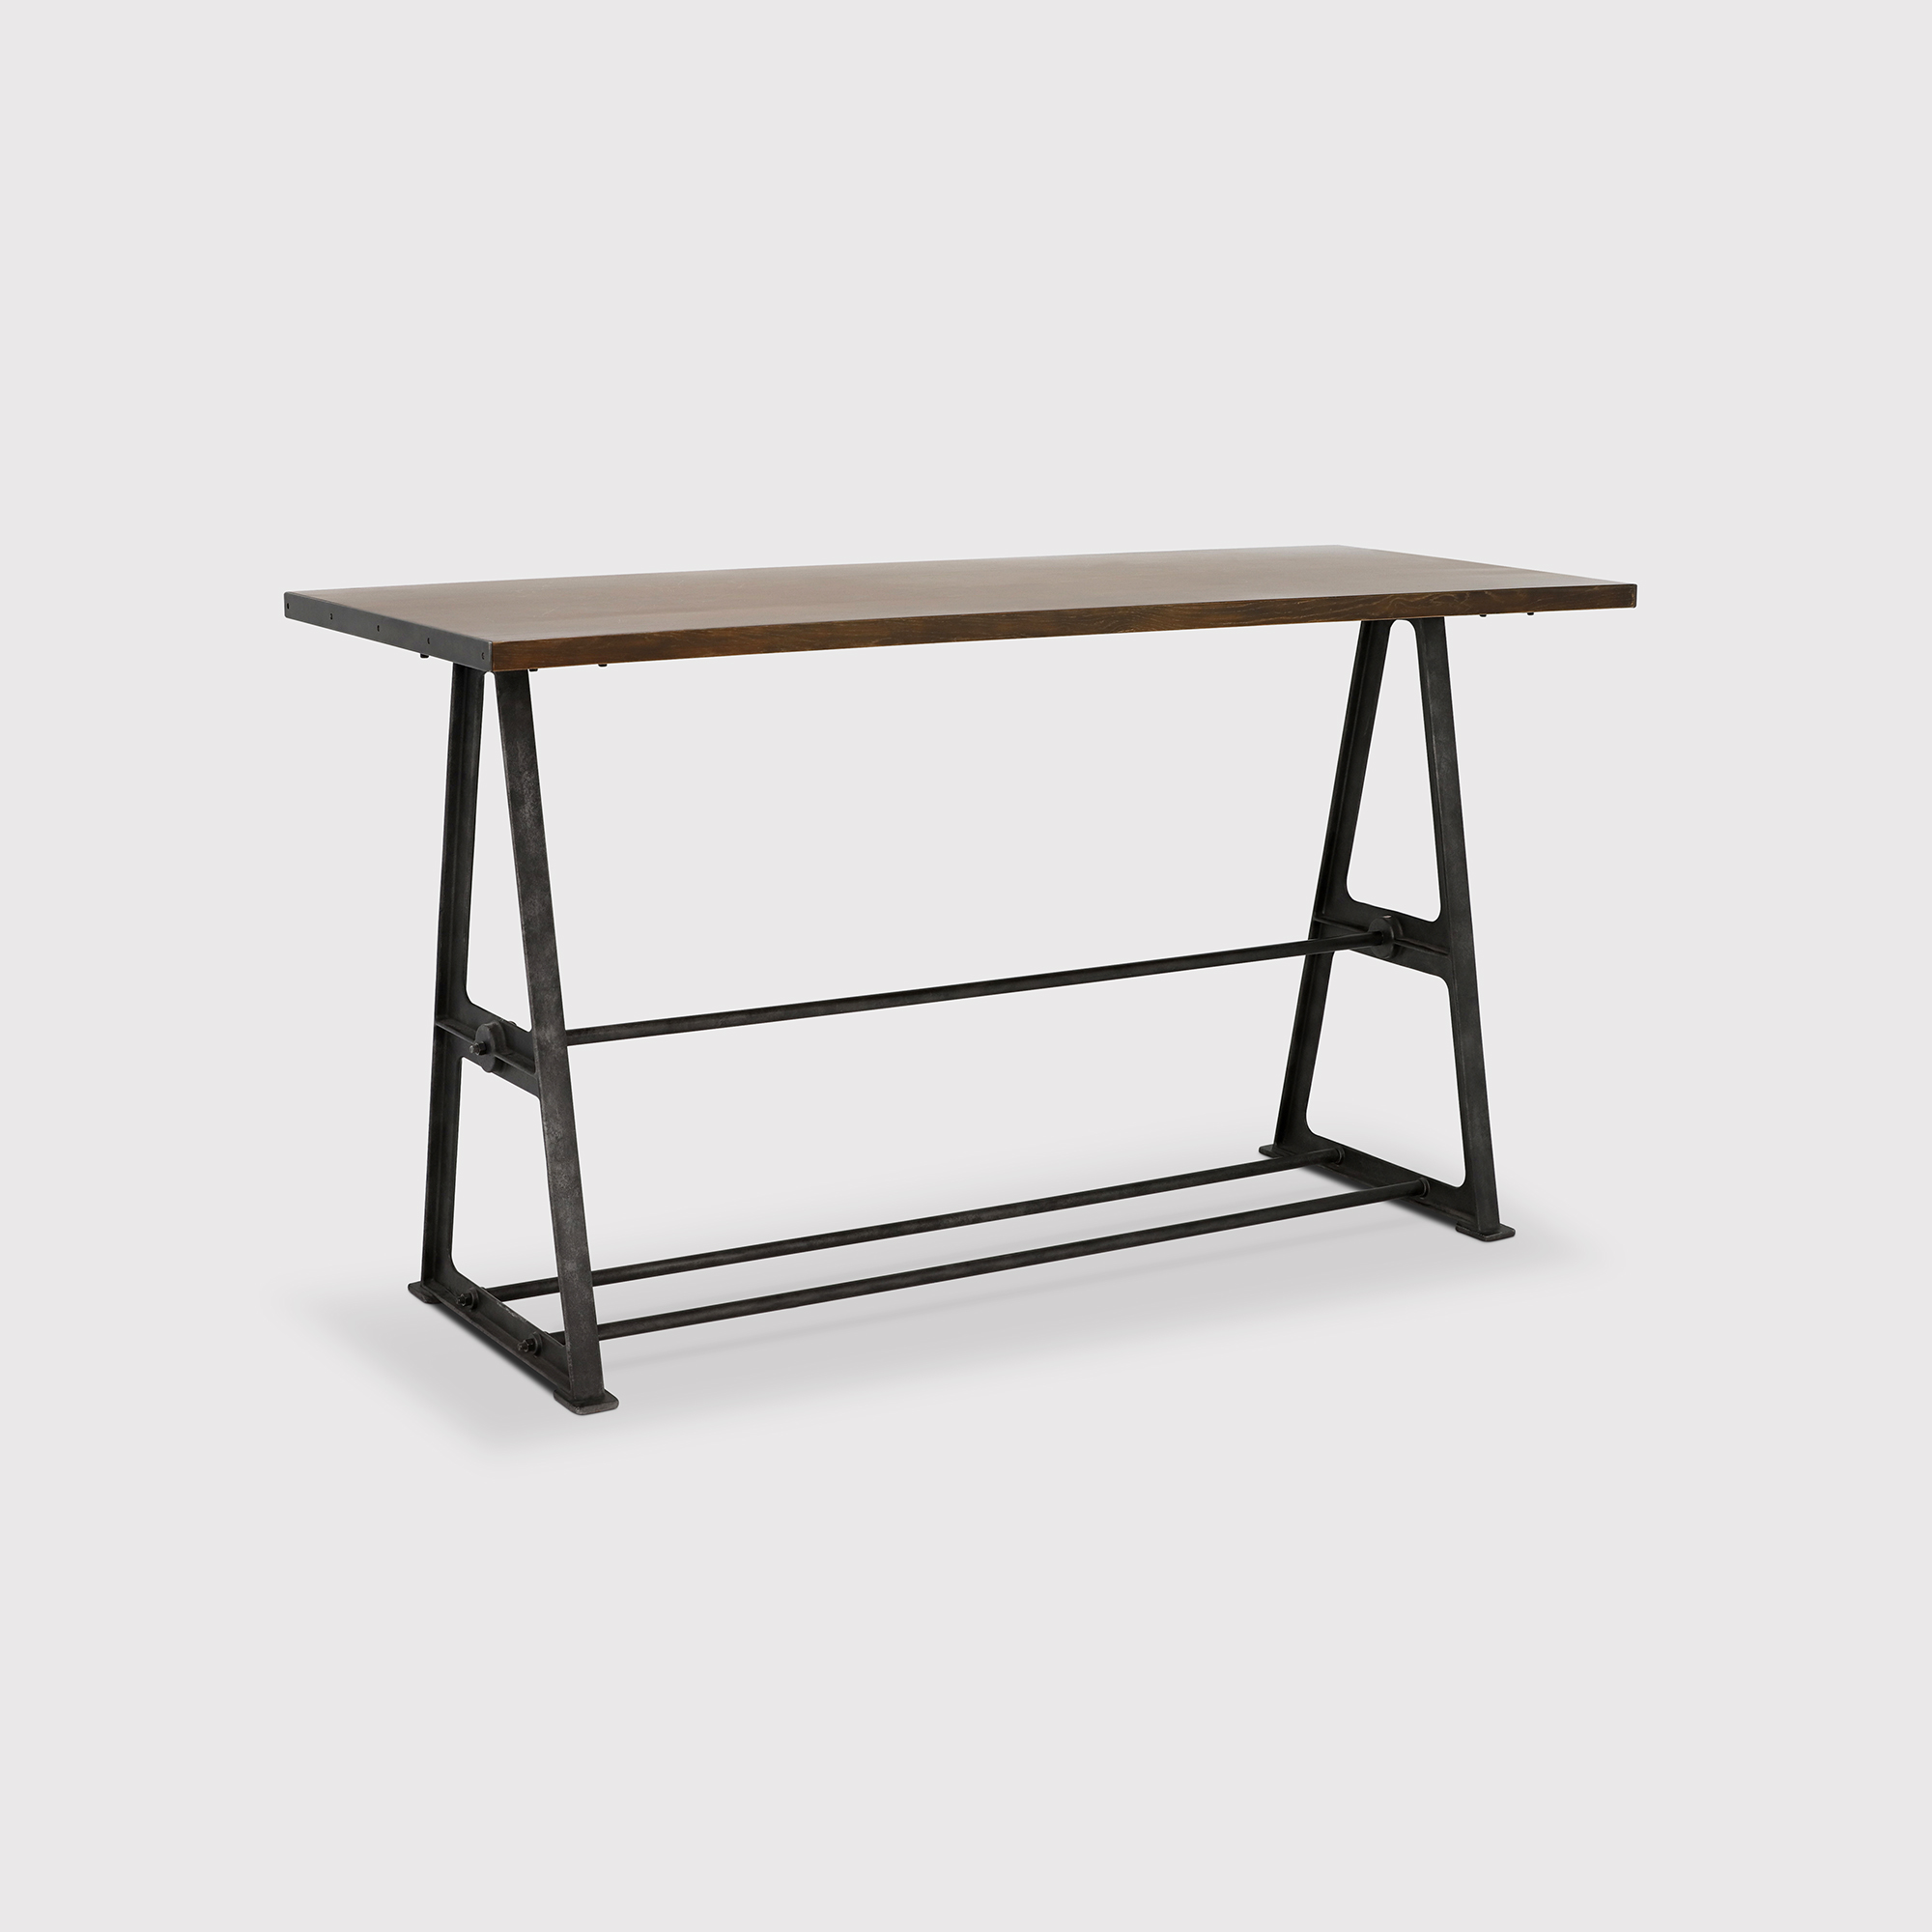 Photo of Bowery industrial bar table 200x80x110cm in brown